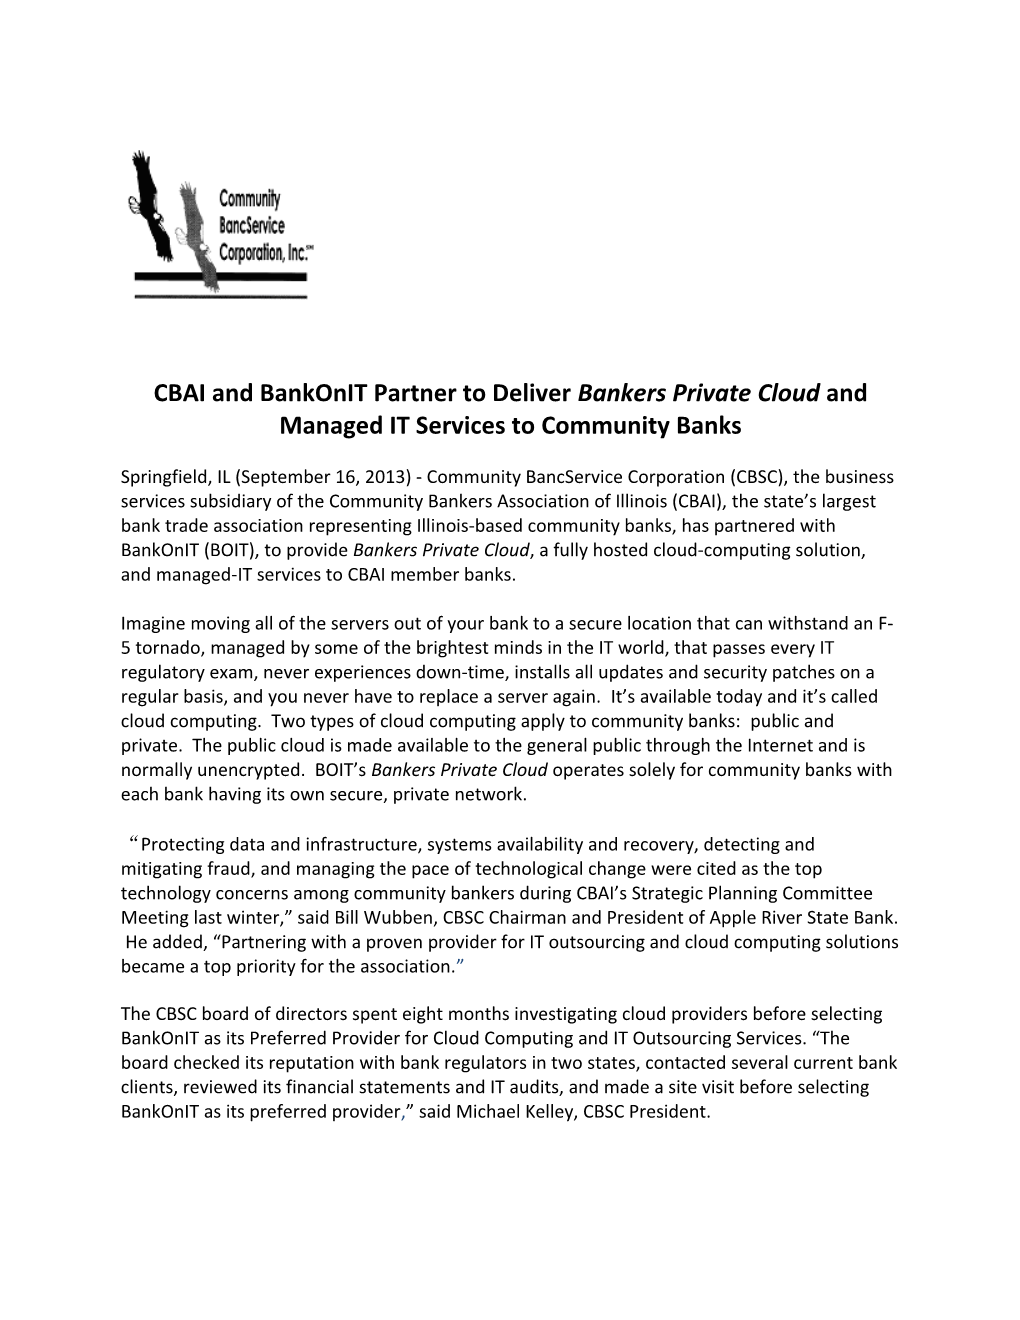 CBAI and Bankonit Partner to Deliver Bankers Private Cloud and Managed IT Services To